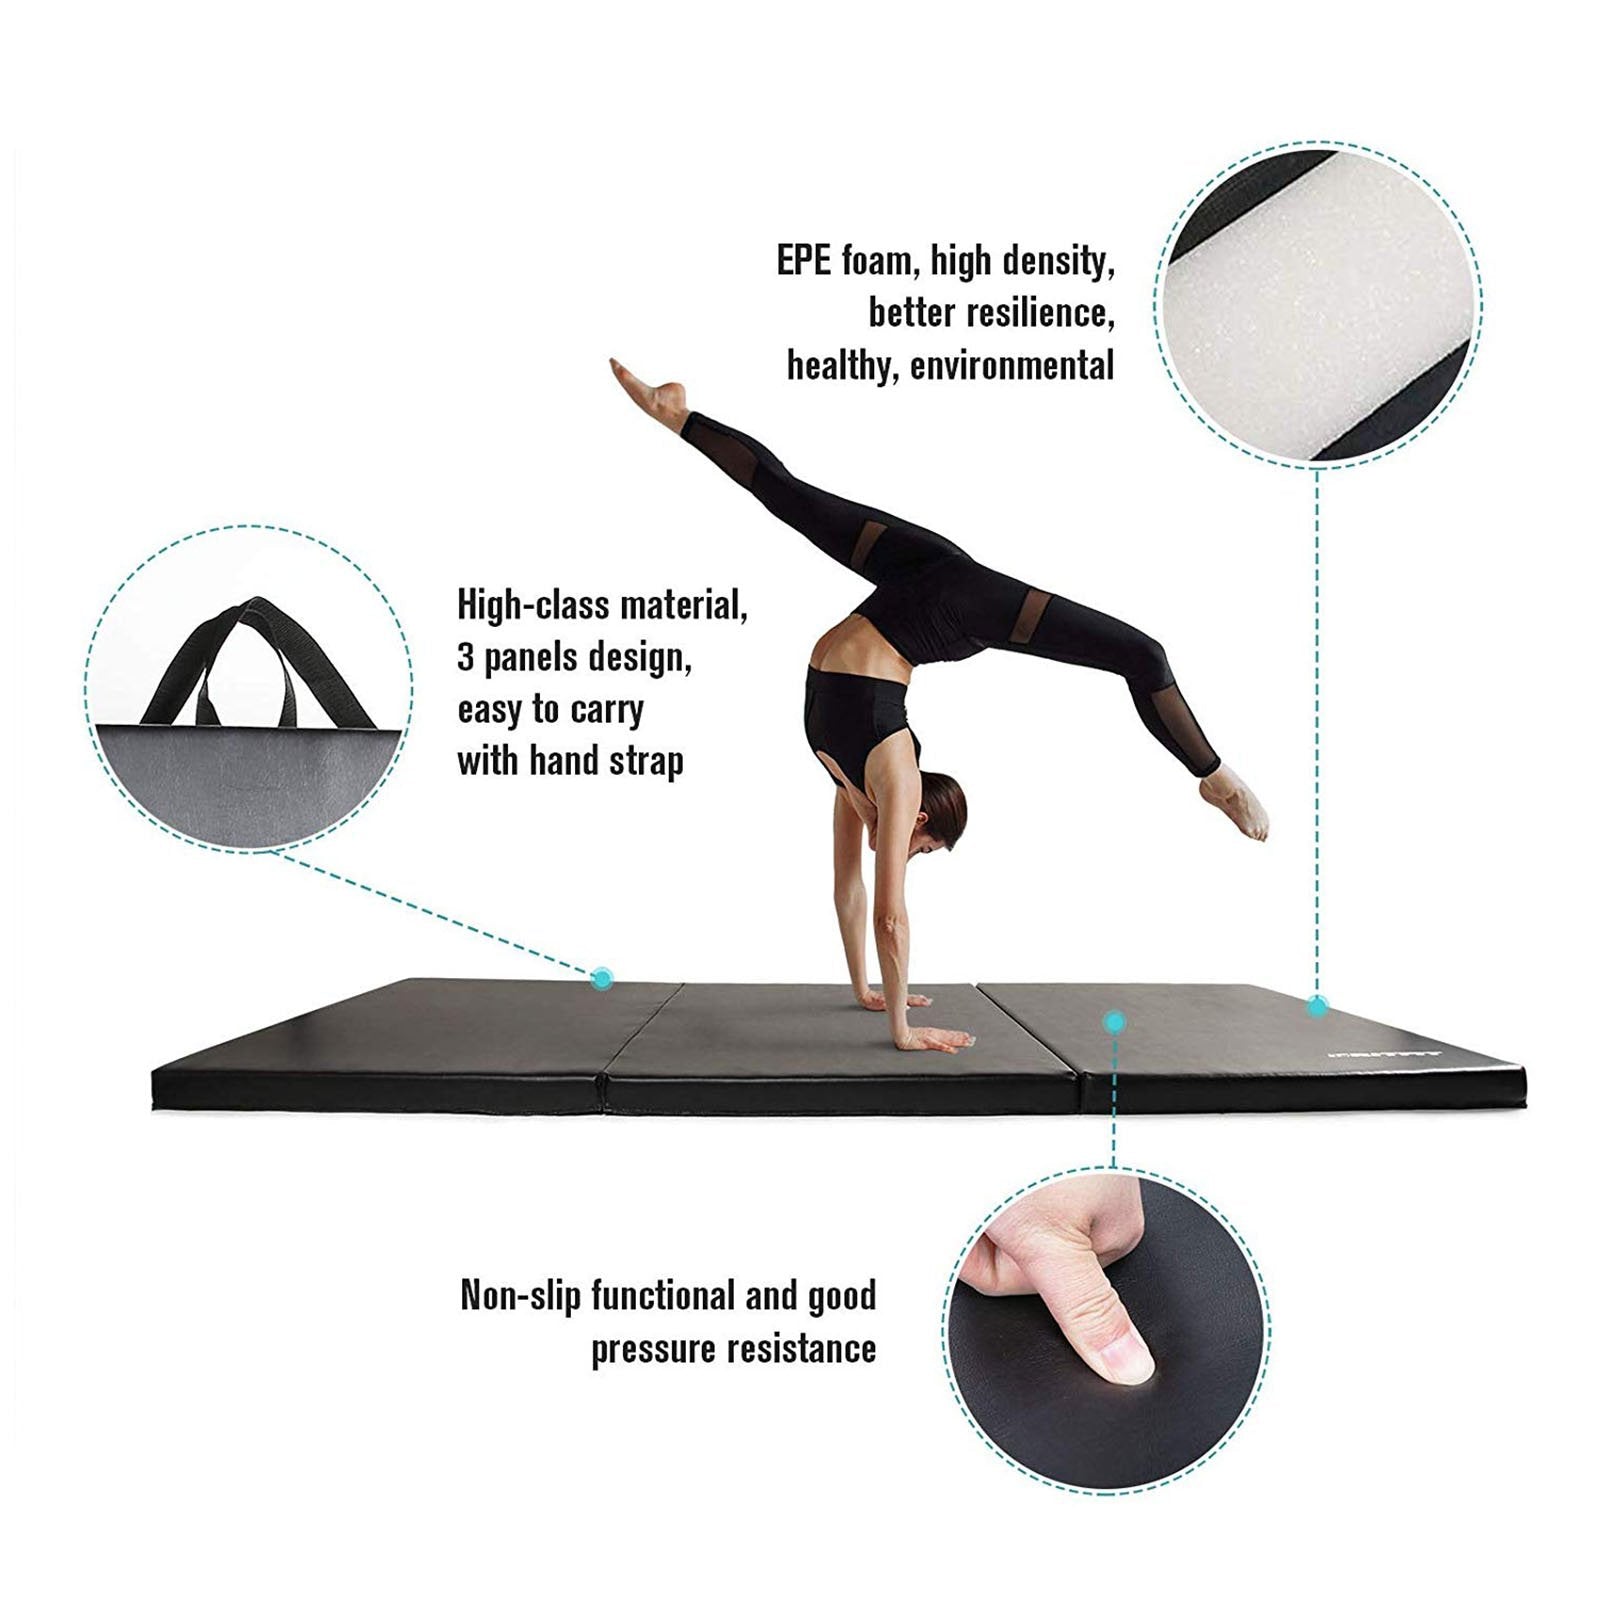 PROSOURCEFIT Tri-Fold Folding Thick Exercise Mat Grey 6 ft. x 2 ft